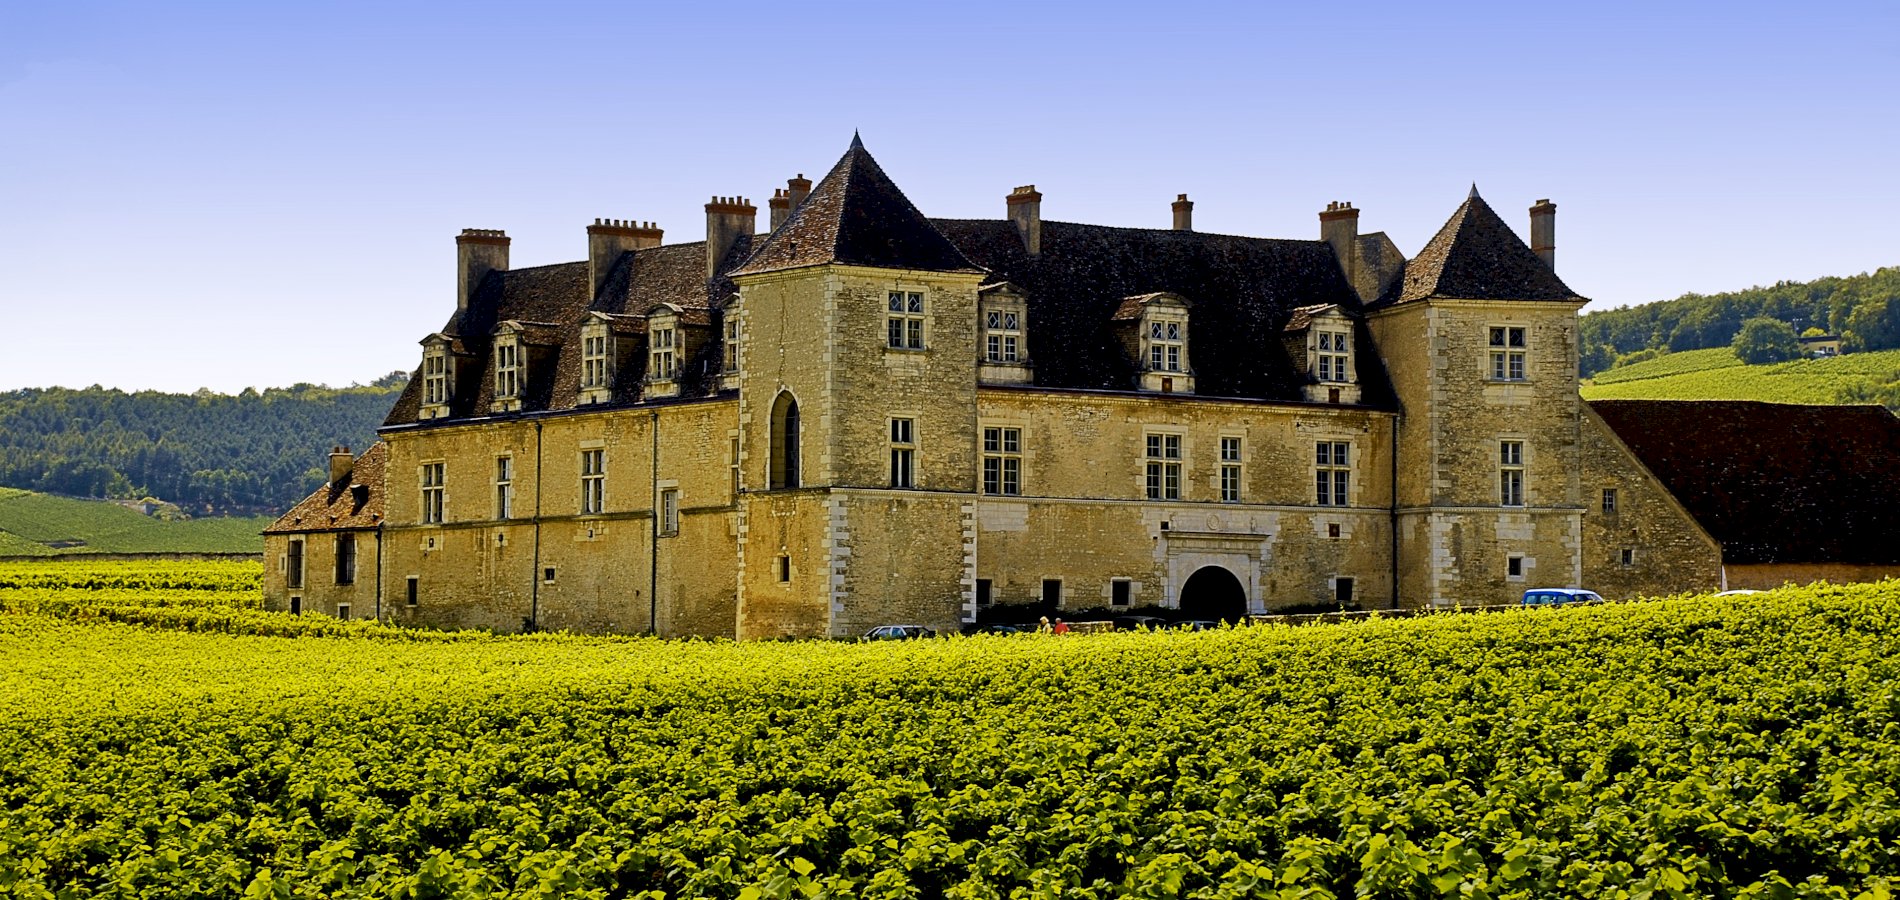 Ophorus Tours - Day tour in Burgundy with 10 wine tastings at local wineries